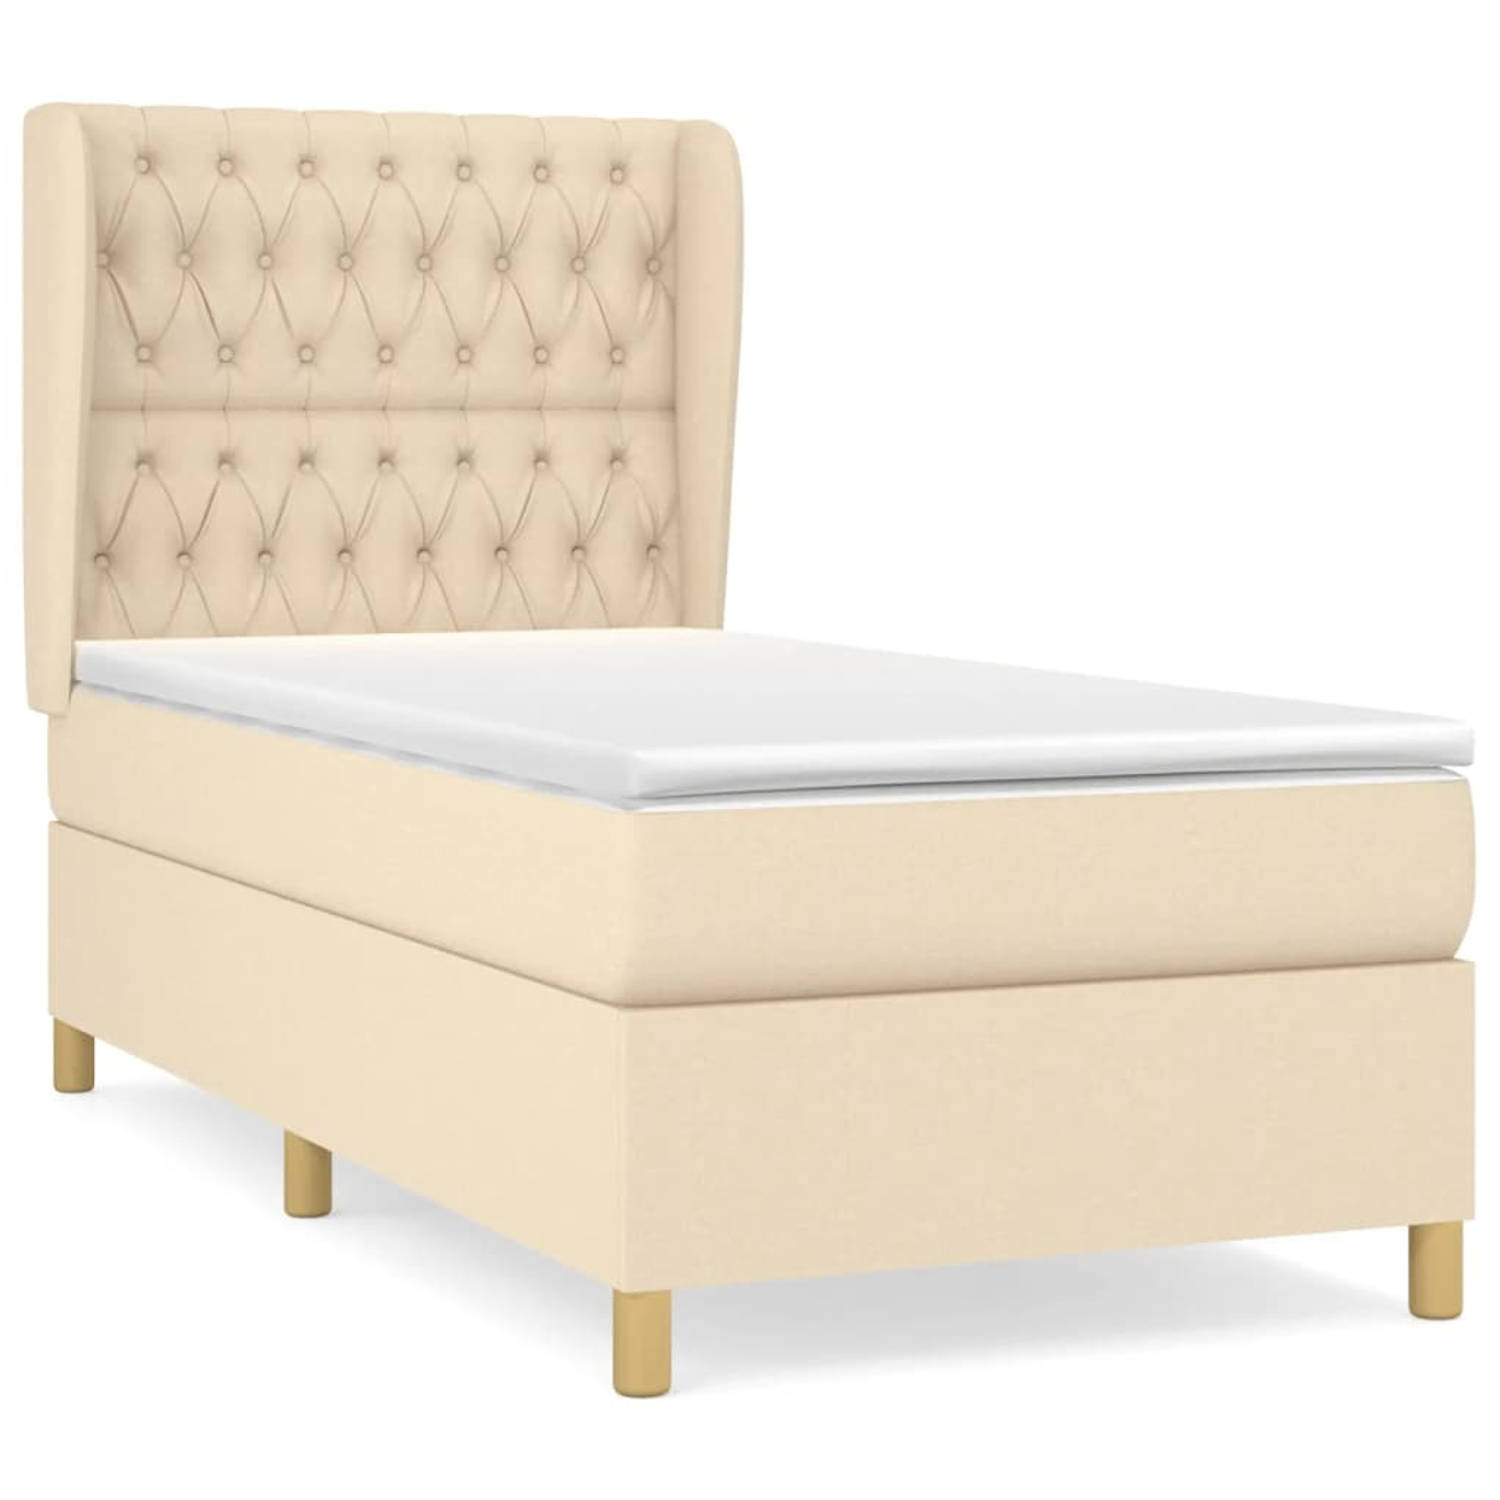 The Living Store Boxspringbed - Comfort - Bed - 203 x 93 x 118/128 cm - Crème - Stof (100% polyester) - Pocketvering